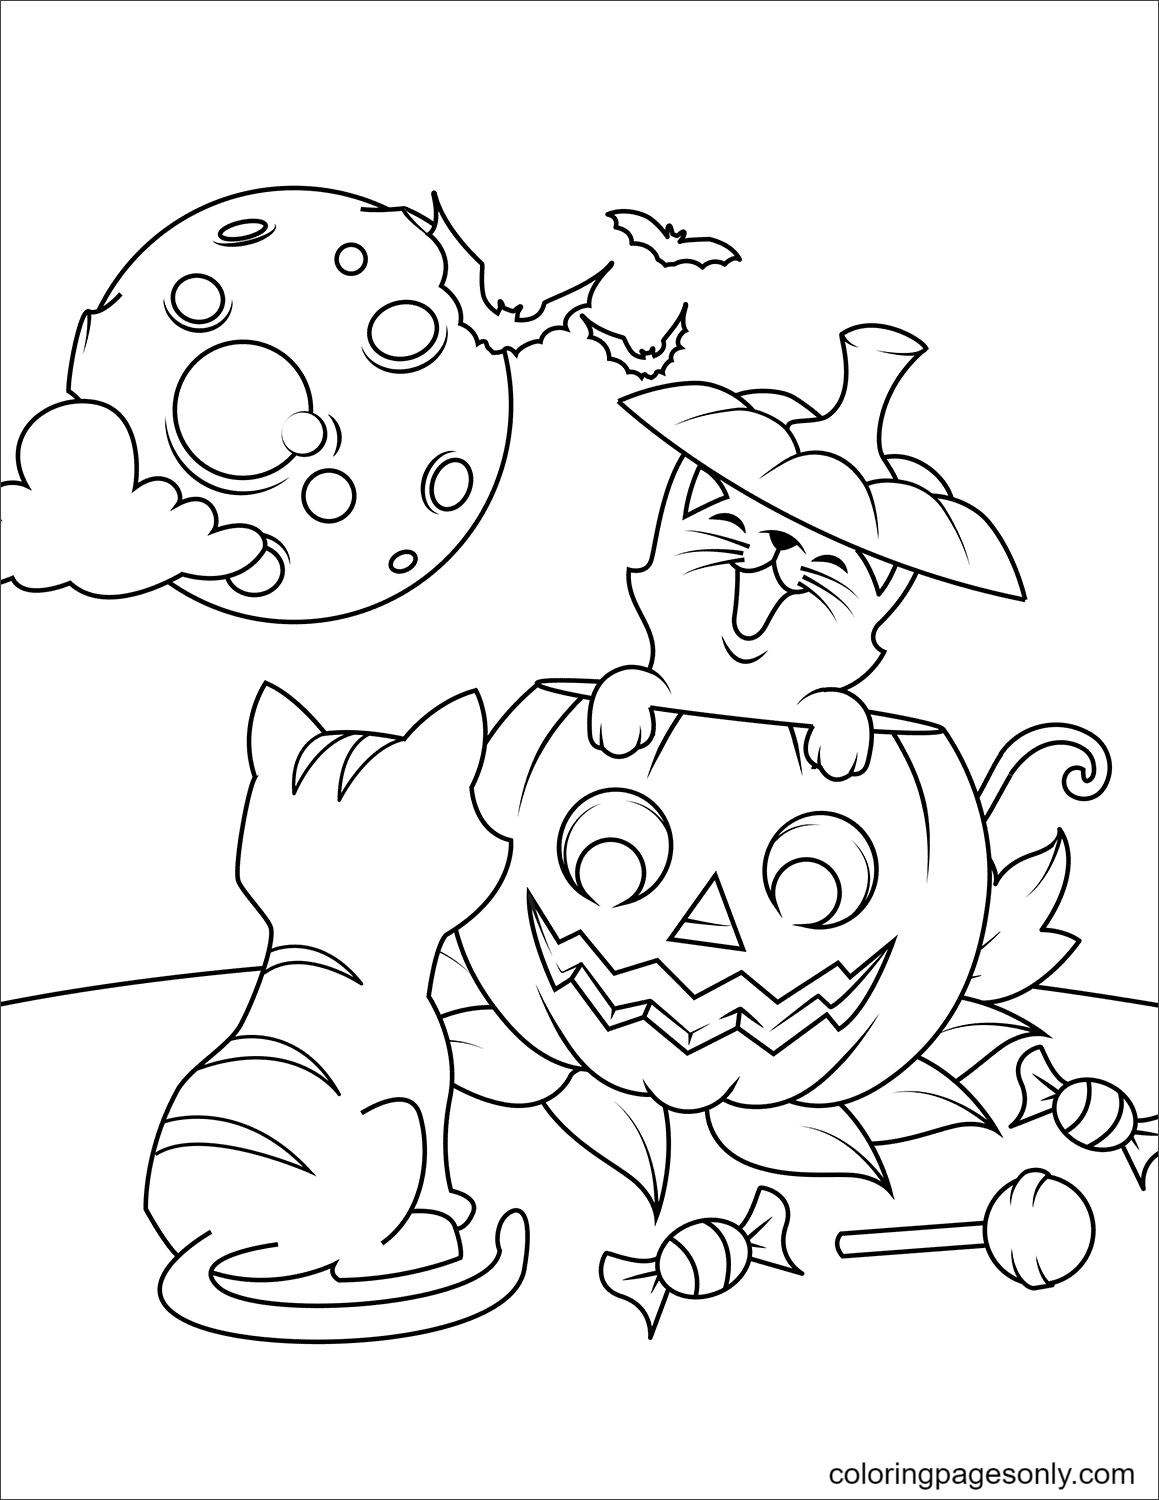 Halloween Cats and Jack O’Lantern Coloring Page